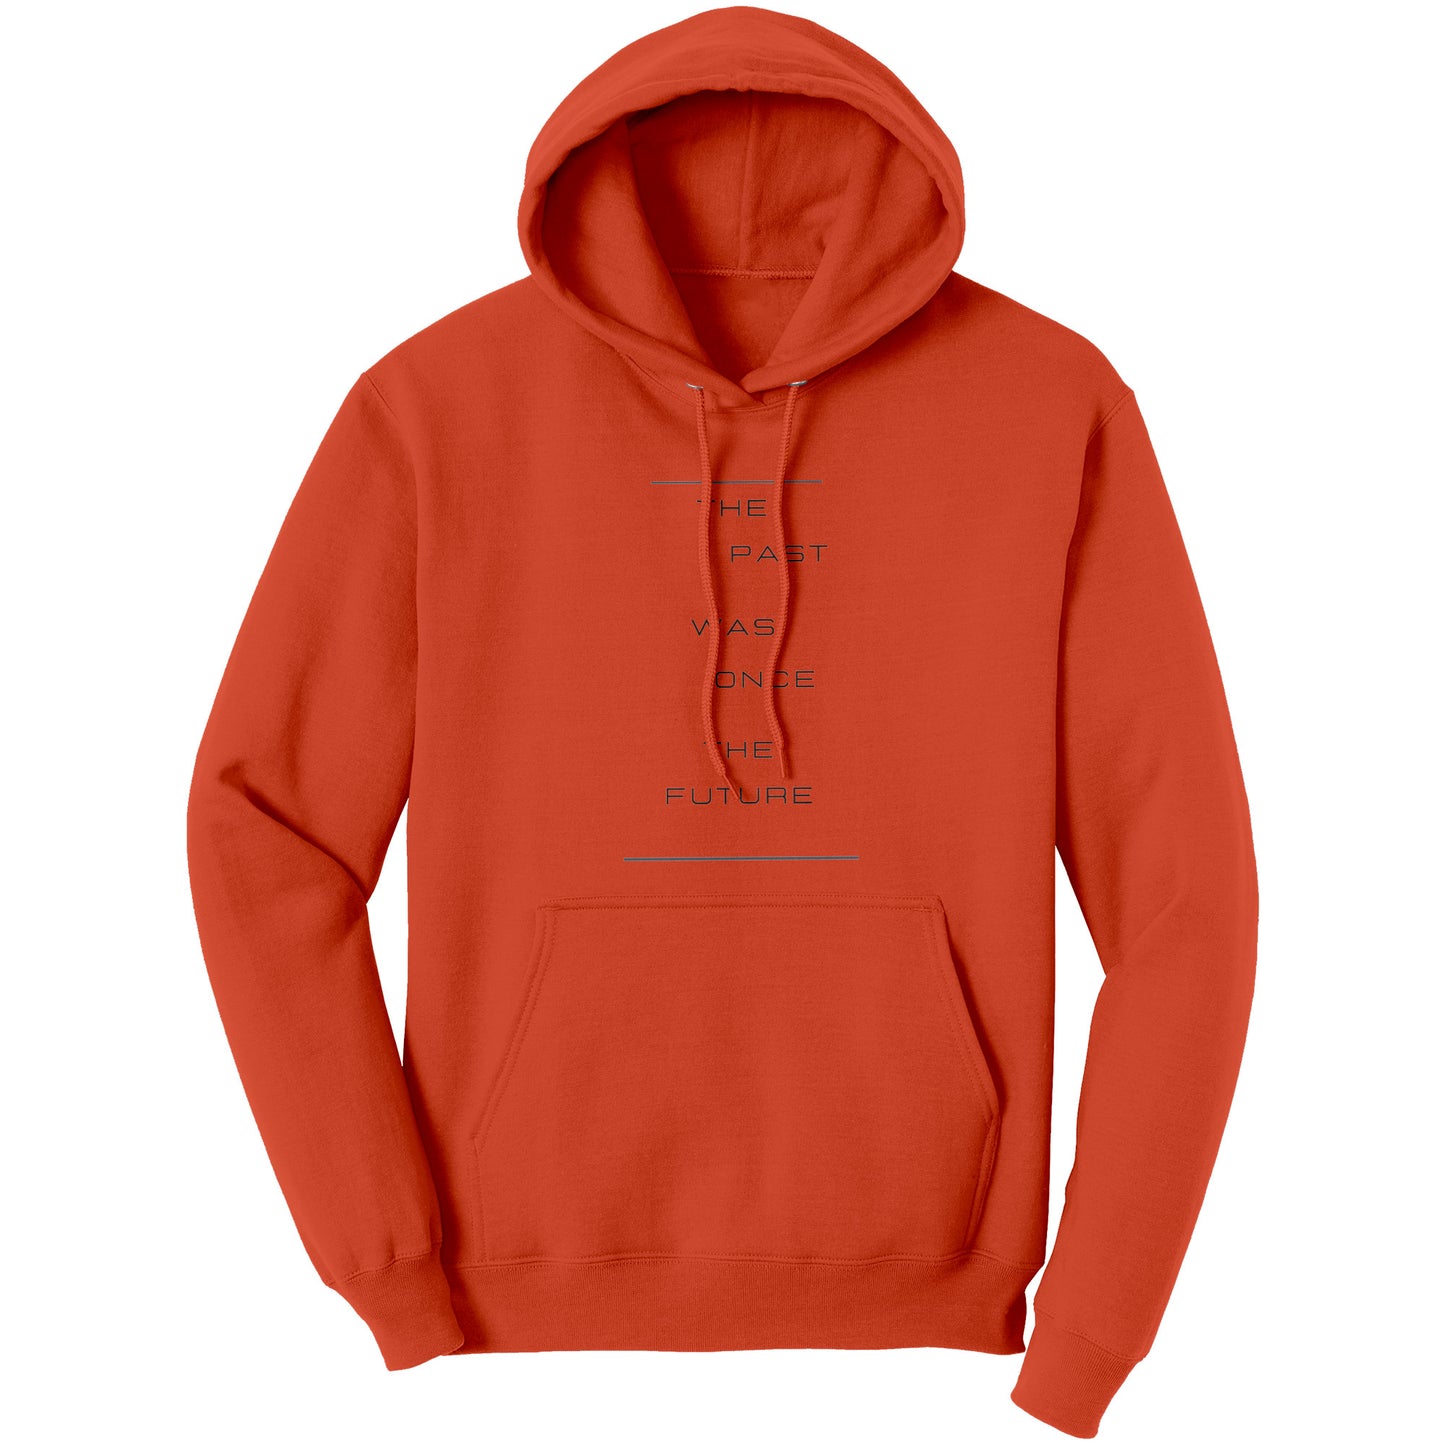 "The Past Was Once" - Premium Hoodie